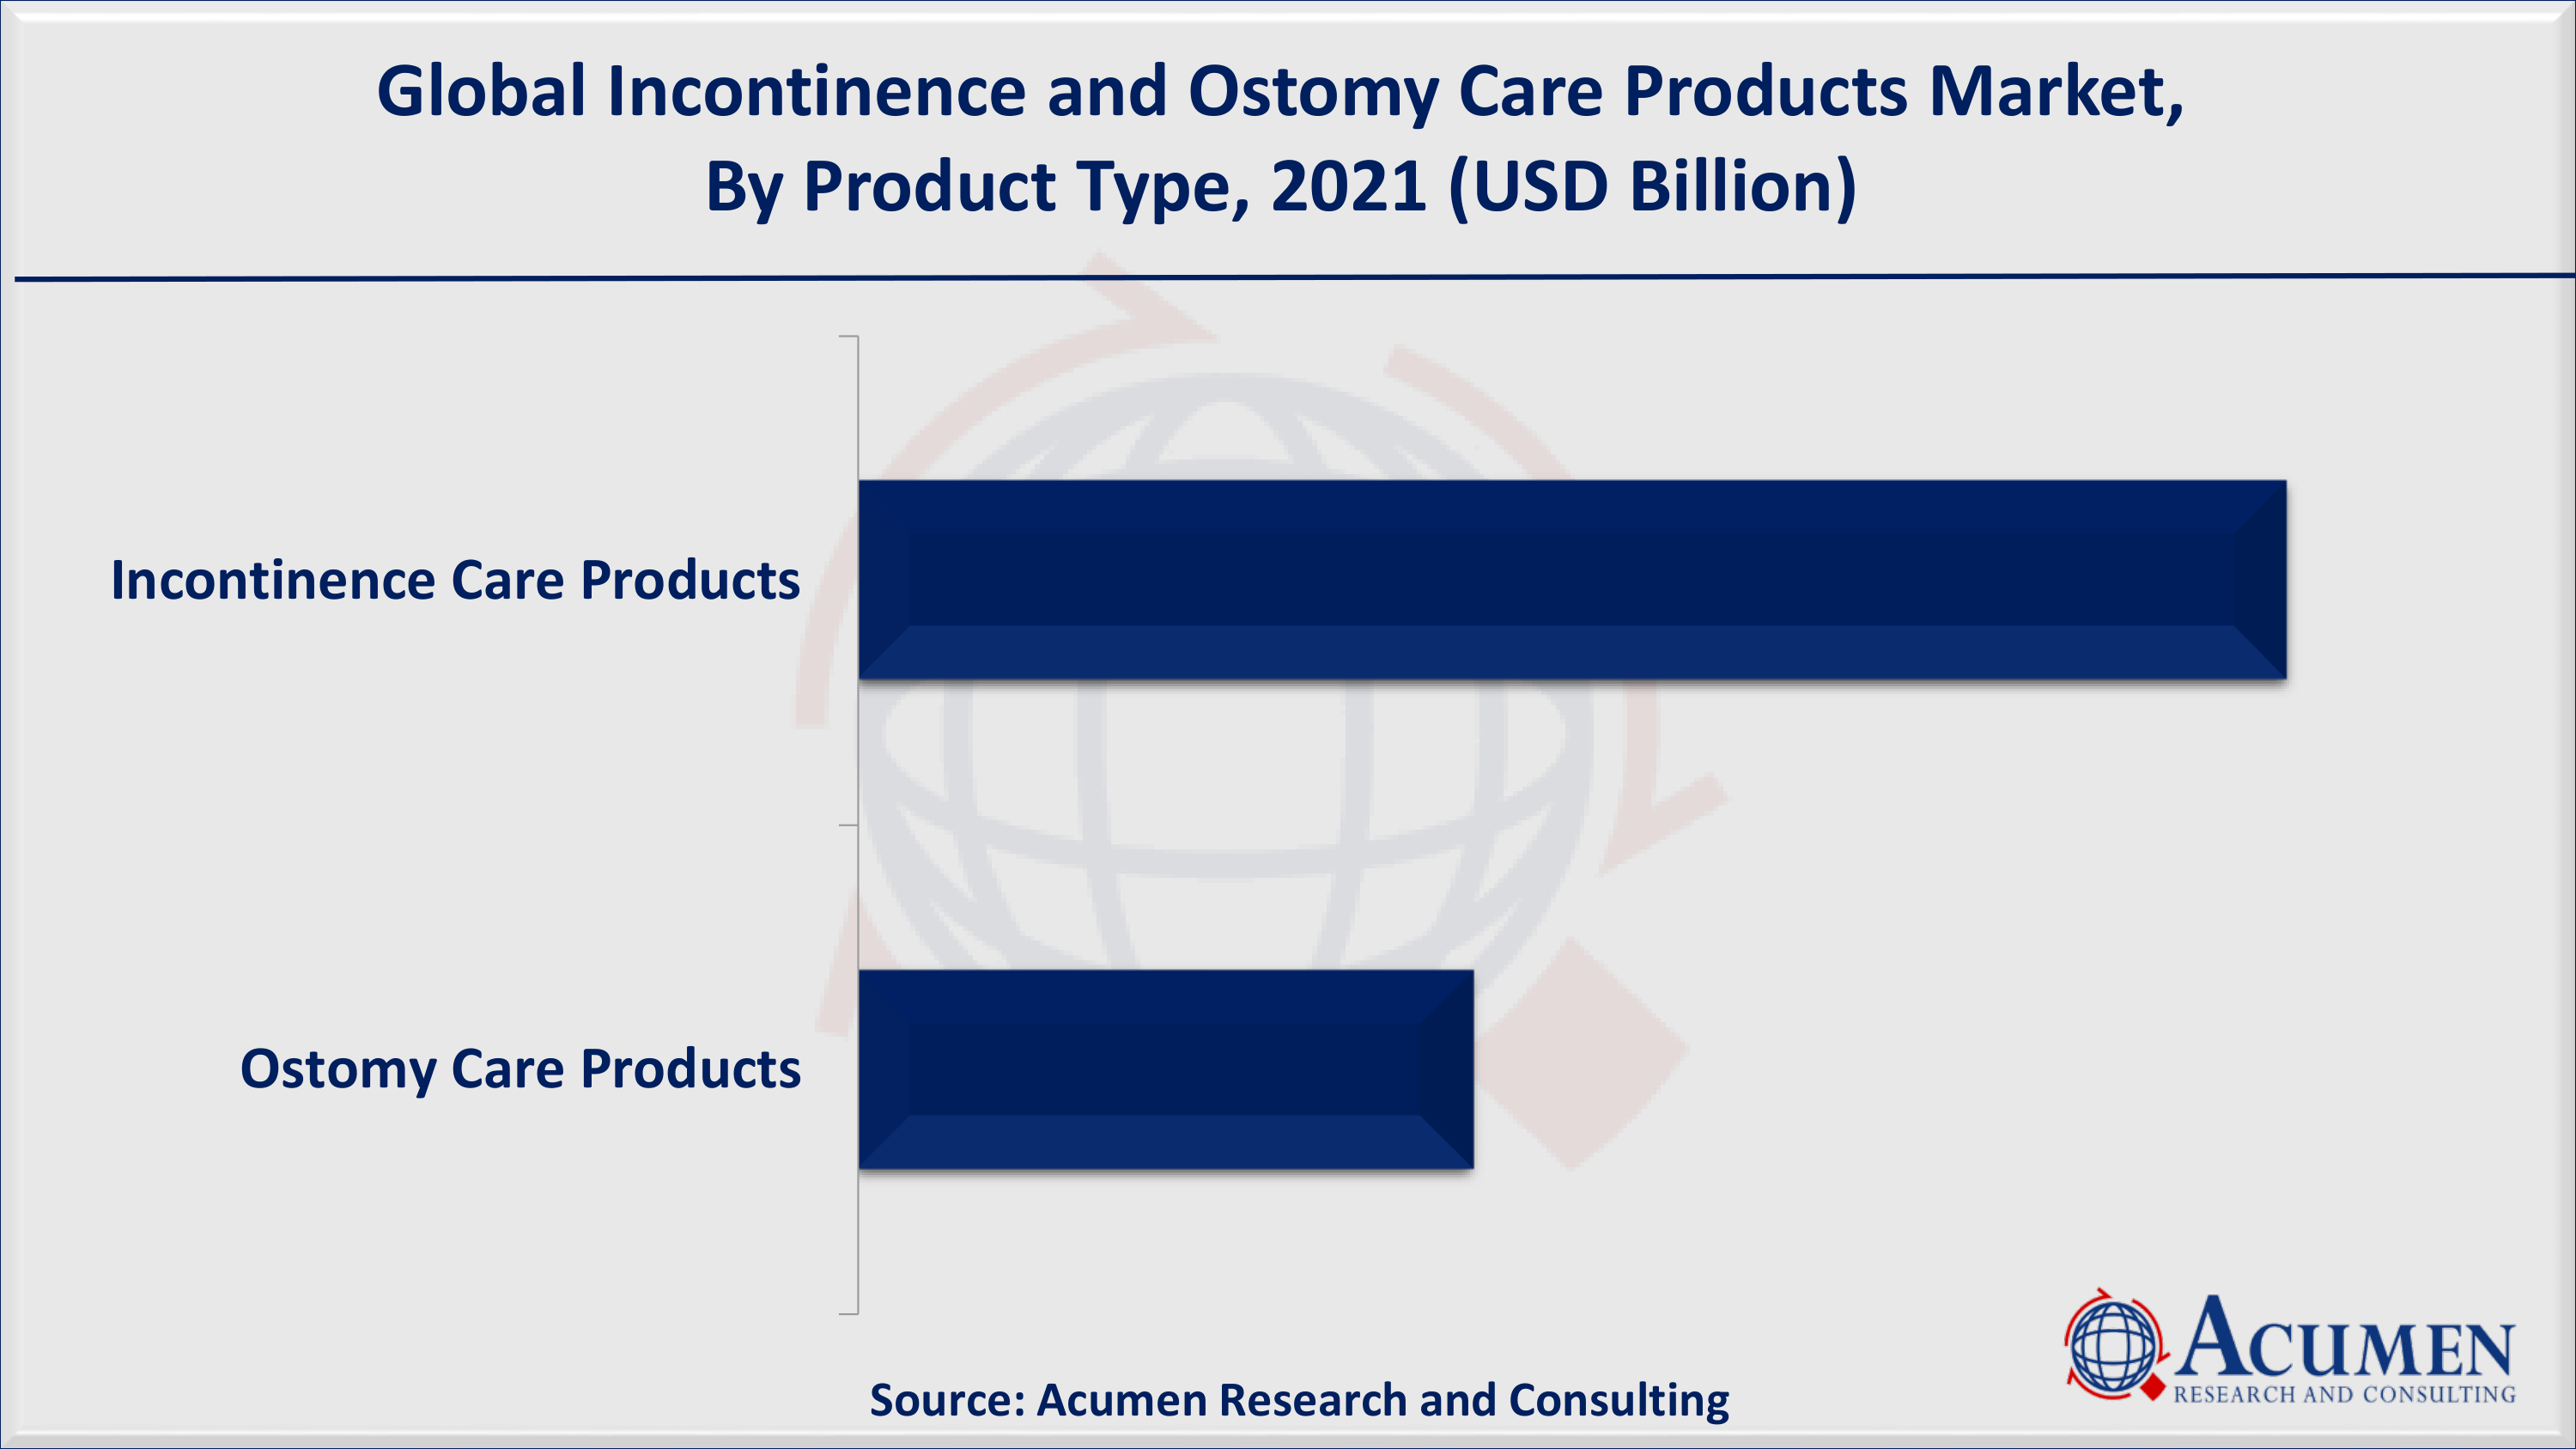 Based on product type, incontinence care products accounted for over 75% of the overall market share in 2021